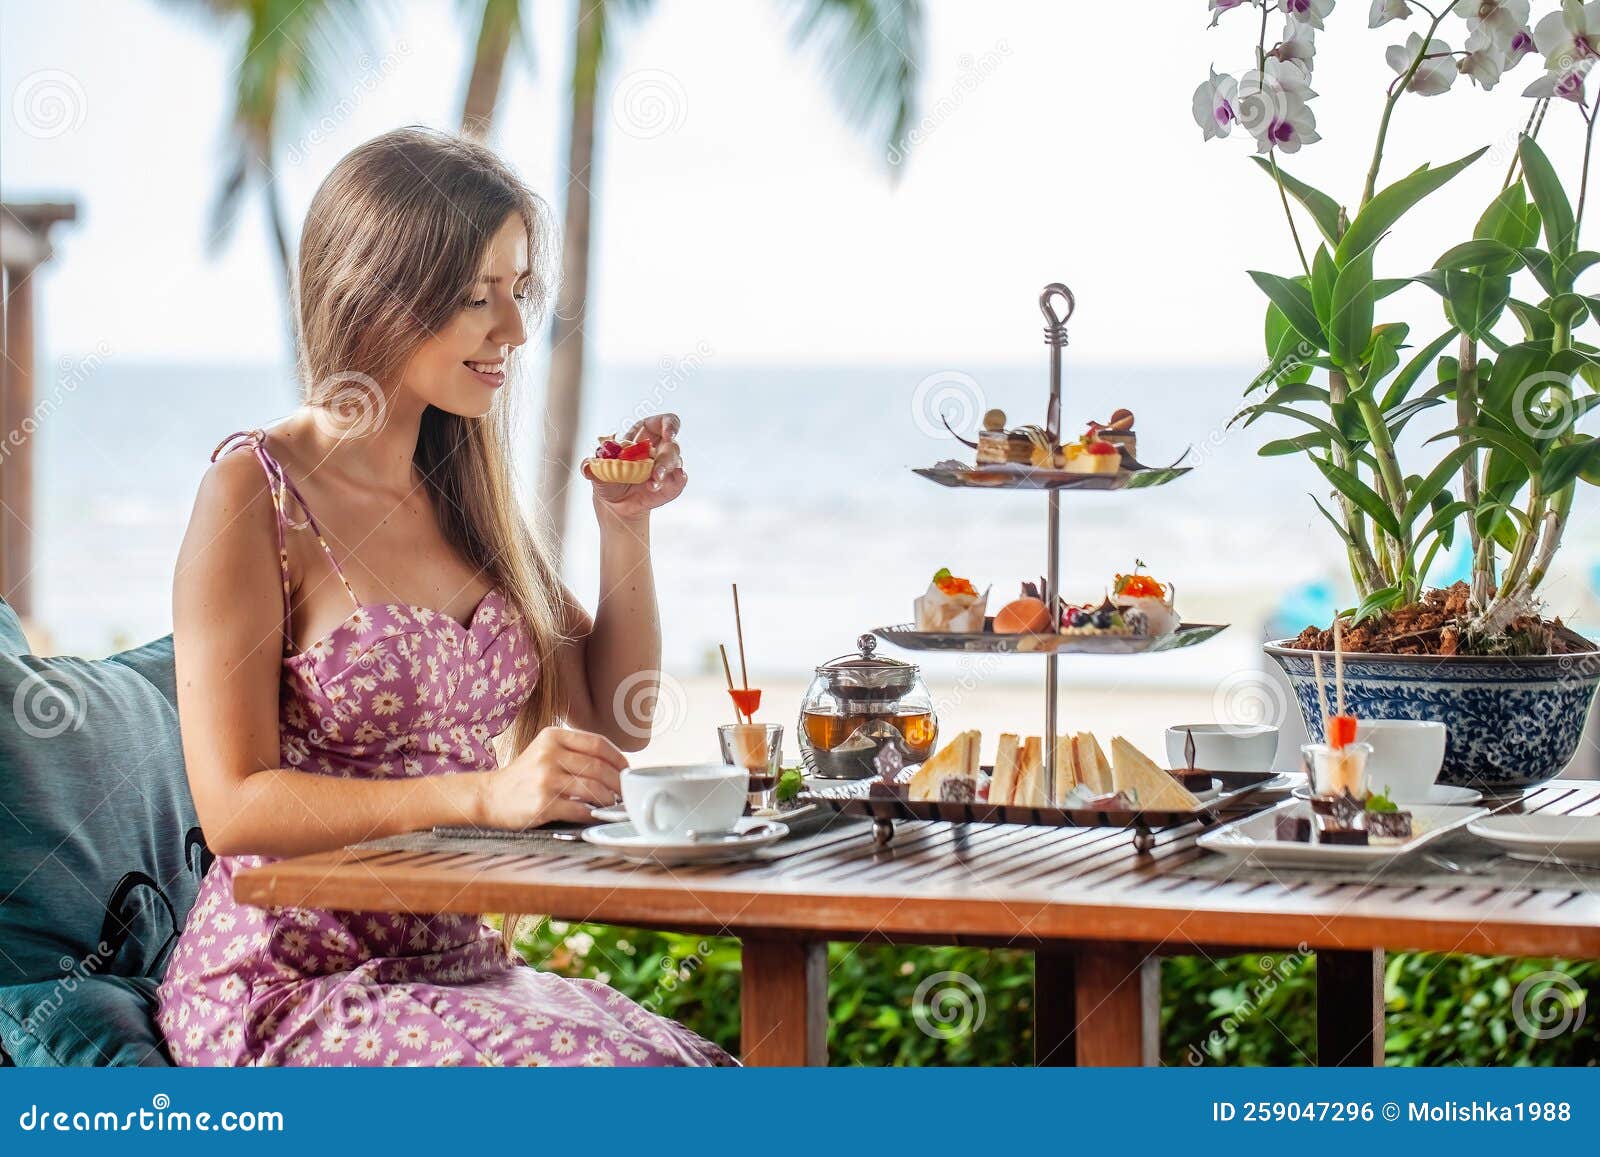 woman take cake out of afternoon tea set in sea outdoors restaurant